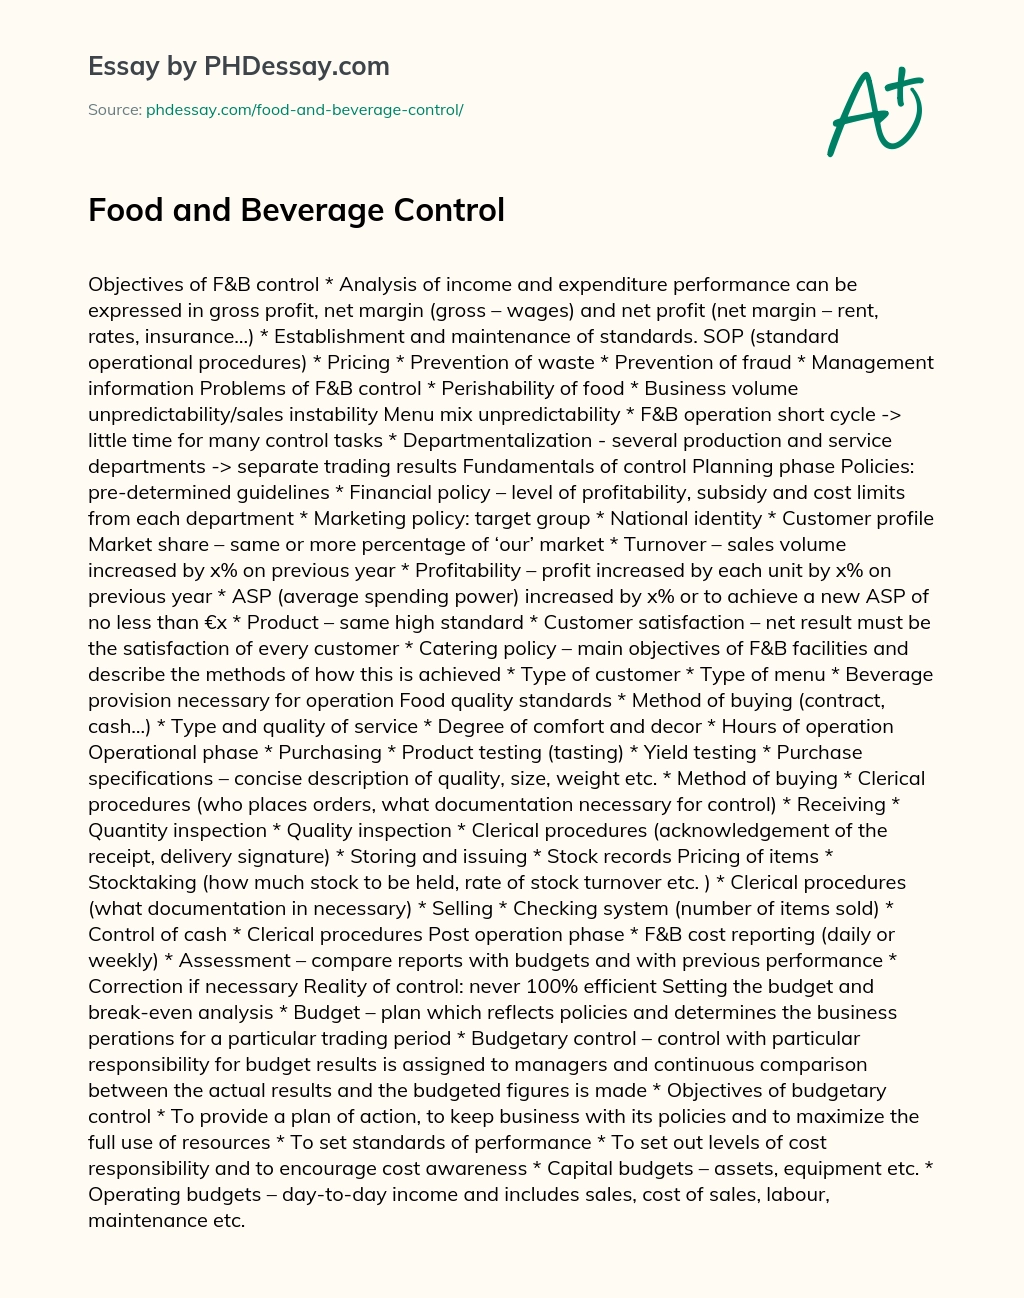 Food and Beverage Control essay